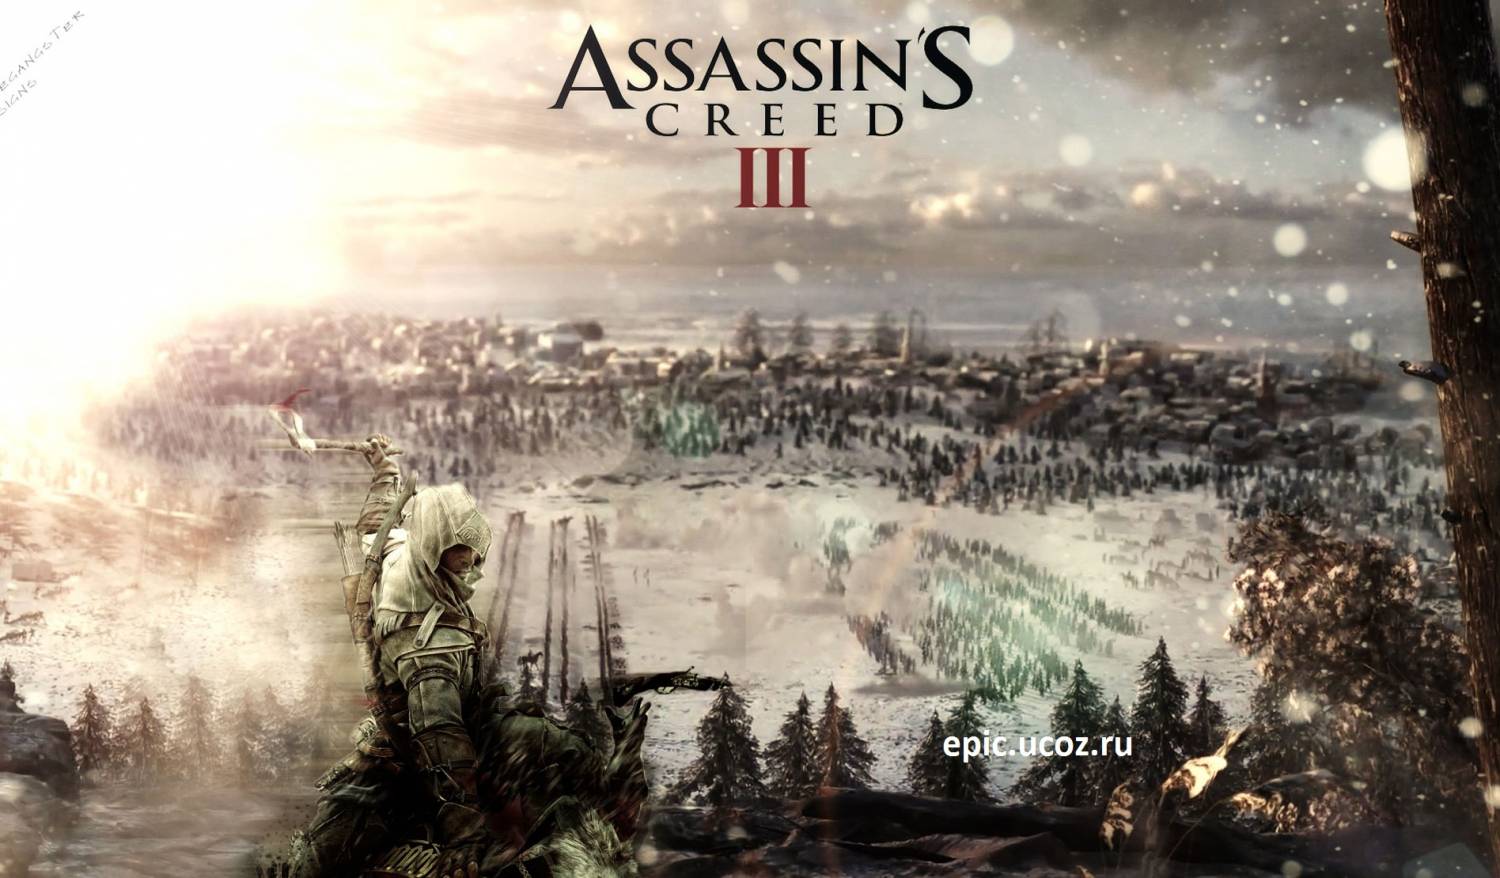 Аssassin's Creed 3 v.1.01 Plus 6 Trainer